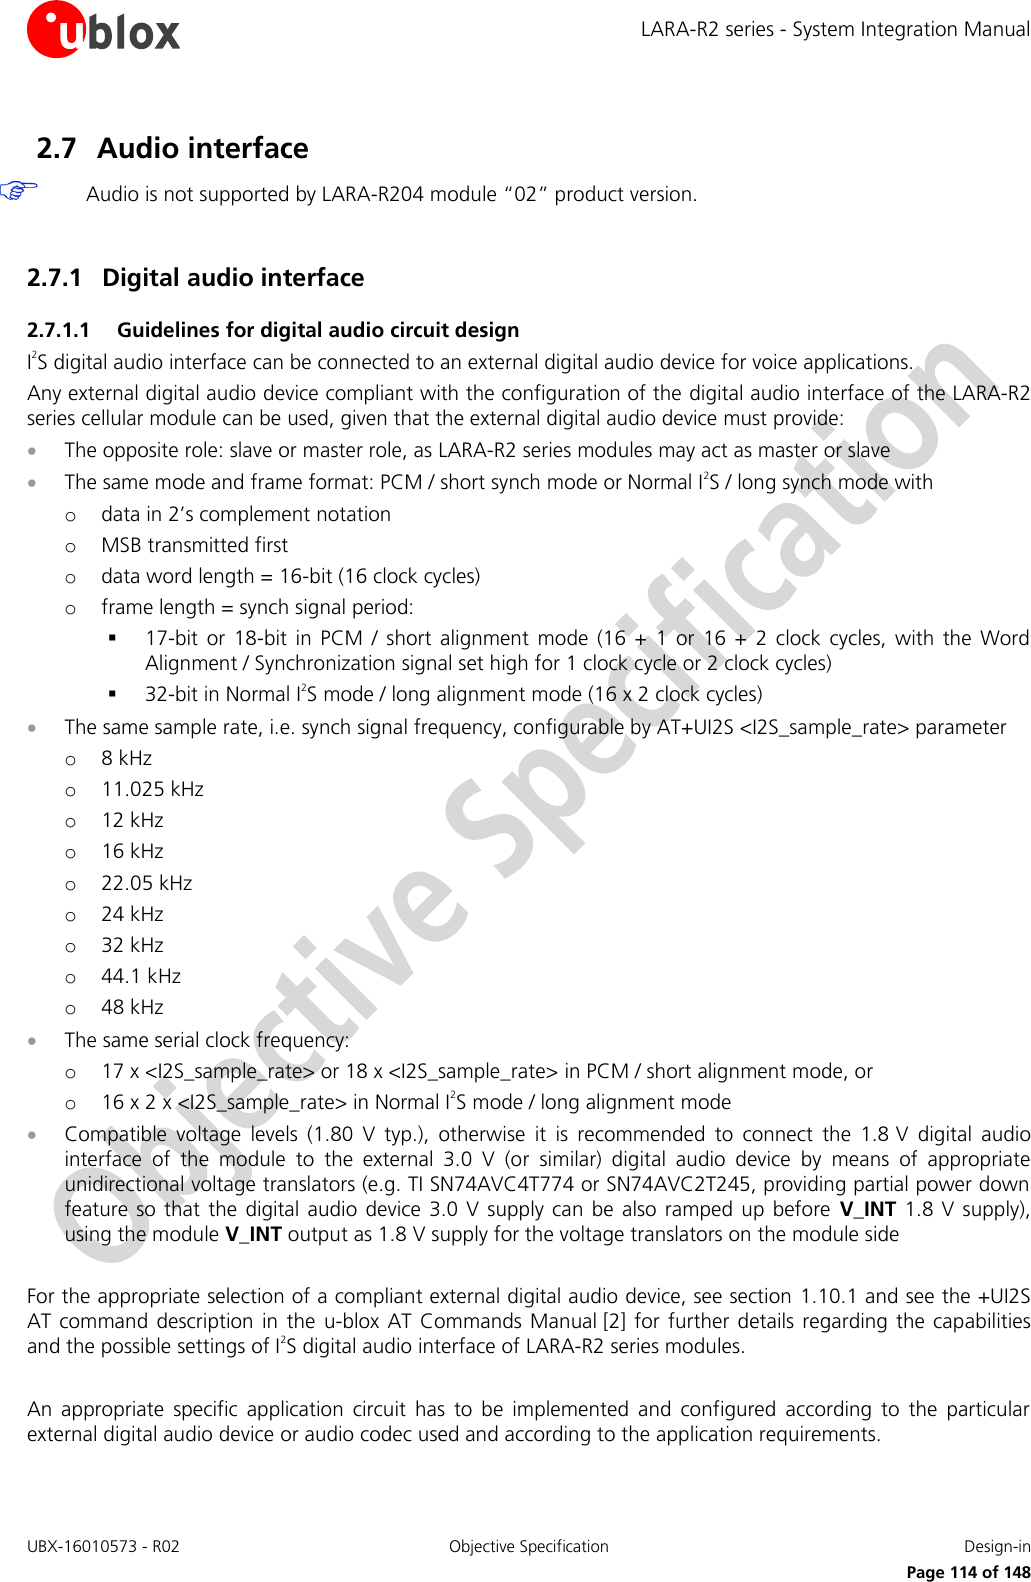 LARA-R2 series - System Integration Manual UBX-16010573 - R02  Objective Specification  Design-in     Page 114 of 148 2.7 Audio interface  Audio is not supported by LARA-R204 module “02” product version.  2.7.1 Digital audio interface 2.7.1.1 Guidelines for digital audio circuit design I2S digital audio interface can be connected to an external digital audio device for voice applications.  Any external digital audio device compliant with the configuration of the digital audio interface of the LARA-R2 series cellular module can be used, given that the external digital audio device must provide:  The opposite role: slave or master role, as LARA-R2 series modules may act as master or slave  The same mode and frame format: PCM / short synch mode or Normal I2S / long synch mode with o data in 2’s complement notation o MSB transmitted first o data word length = 16-bit (16 clock cycles) o frame length = synch signal period:  17-bit  or  18-bit  in  PCM  /  short  alignment  mode  (16  +  1  or  16  +  2  clock  cycles,  with the  Word Alignment / Synchronization signal set high for 1 clock cycle or 2 clock cycles)  32-bit in Normal I2S mode / long alignment mode (16 x 2 clock cycles)  The same sample rate, i.e. synch signal frequency, configurable by AT+UI2S &lt;I2S_sample_rate&gt; parameter o 8 kHz o 11.025 kHz o 12 kHz o 16 kHz o 22.05 kHz o 24 kHz o 32 kHz o 44.1 kHz o 48 kHz  The same serial clock frequency: o 17 x &lt;I2S_sample_rate&gt; or 18 x &lt;I2S_sample_rate&gt; in PCM / short alignment mode, or  o 16 x 2 x &lt;I2S_sample_rate&gt; in Normal I2S mode / long alignment mode  Compatible  voltage  levels  (1.80  V  typ.),  otherwise  it  is  recommended  to  connect  the  1.8 V  digital  audio interface  of  the  module  to  the  external  3.0  V  (or  similar)  digital  audio  device  by  means  of  appropriate unidirectional voltage translators (e.g. TI SN74AVC4T774 or SN74AVC2T245, providing partial power down feature  so that  the  digital audio  device 3.0  V supply can  be  also ramped up  before  V_INT  1.8 V  supply), using the module V_INT output as 1.8 V supply for the voltage translators on the module side   For the appropriate selection of a compliant external digital audio device, see section  1.10.1 and see the +UI2S AT command description  in  the  u-blox  AT  Commands  Manual [2]  for  further  details regarding  the  capabilities and the possible settings of I2S digital audio interface of LARA-R2 series modules.  An  appropriate  specific  application  circuit  has  to  be  implemented  and  configured  according  to  the  particular external digital audio device or audio codec used and according to the application requirements.  